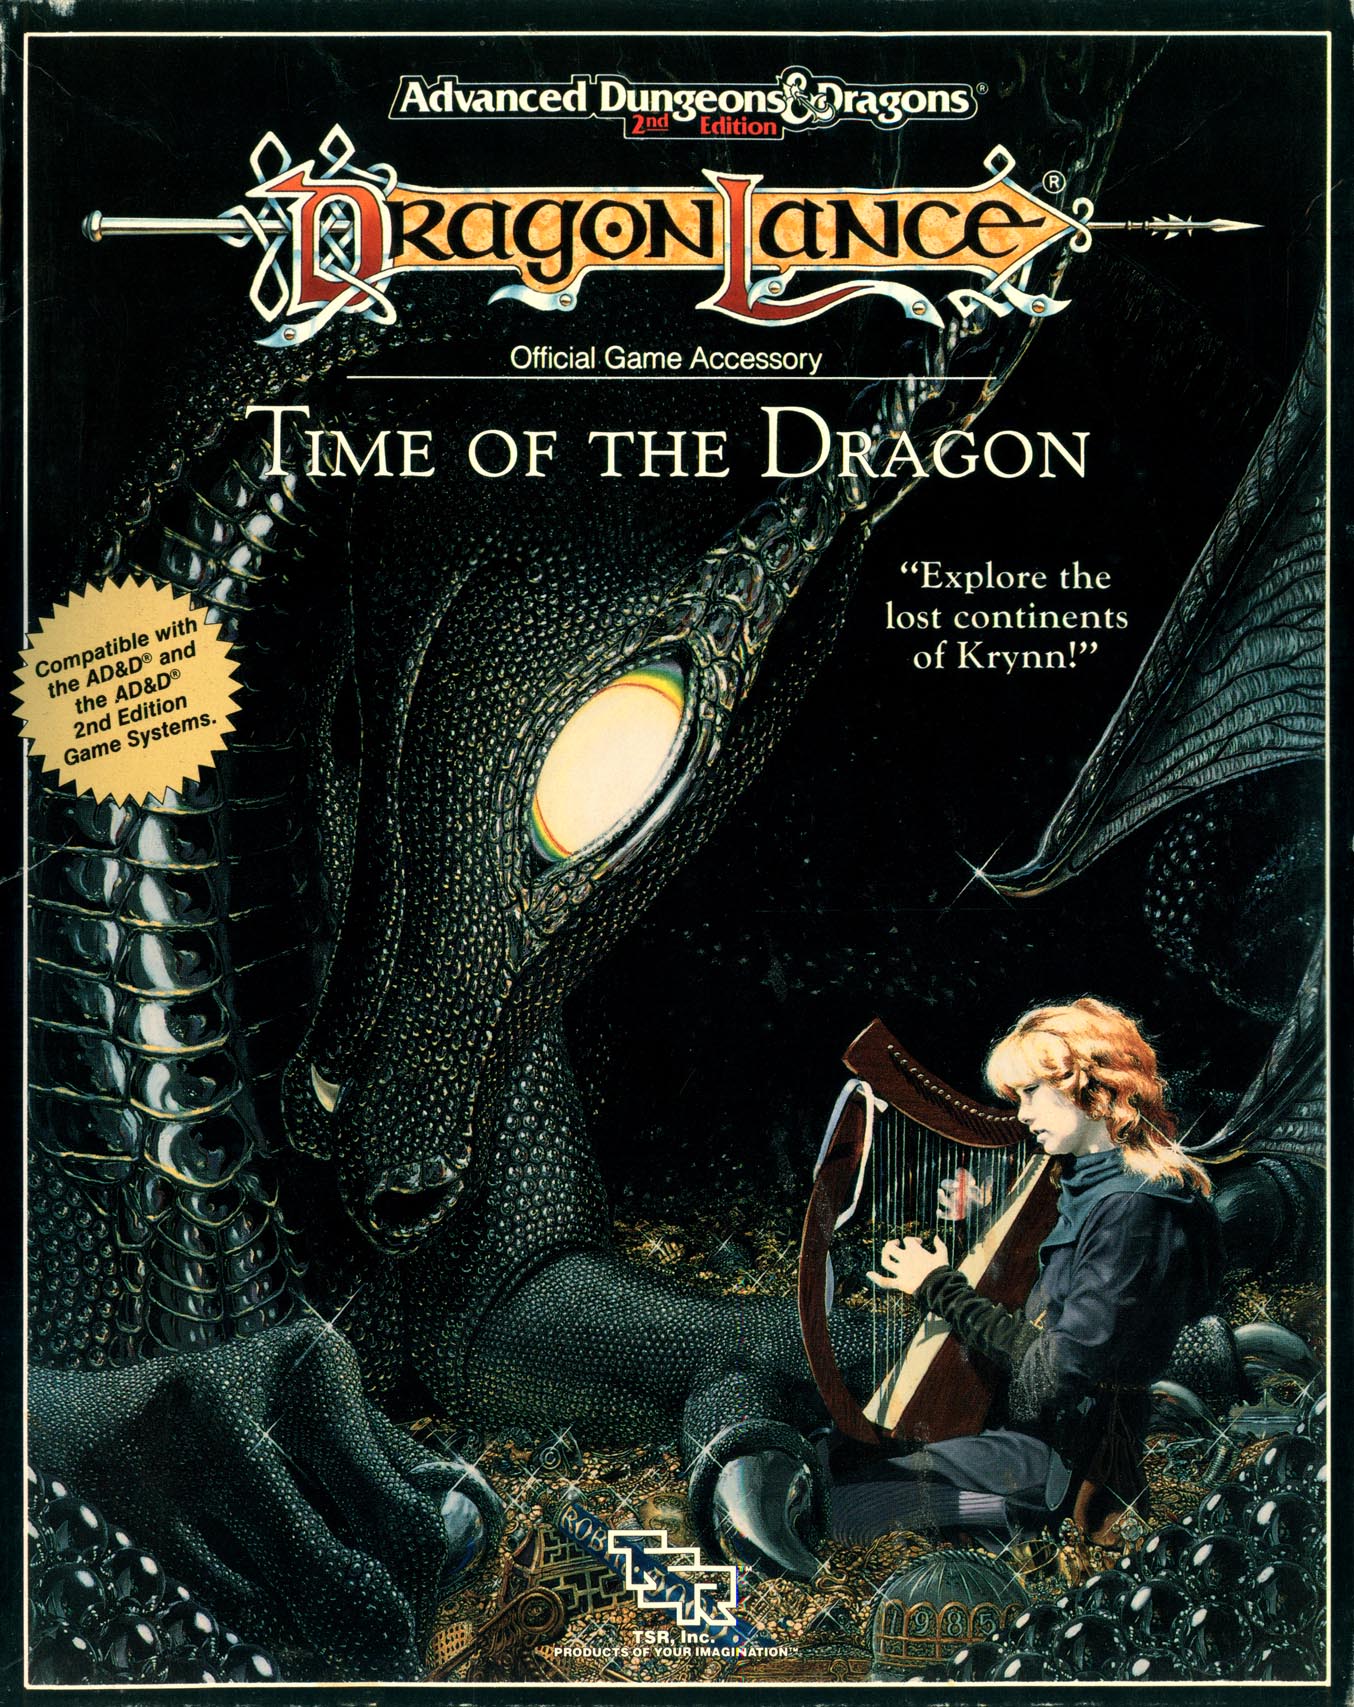 Time of the DragonCover art